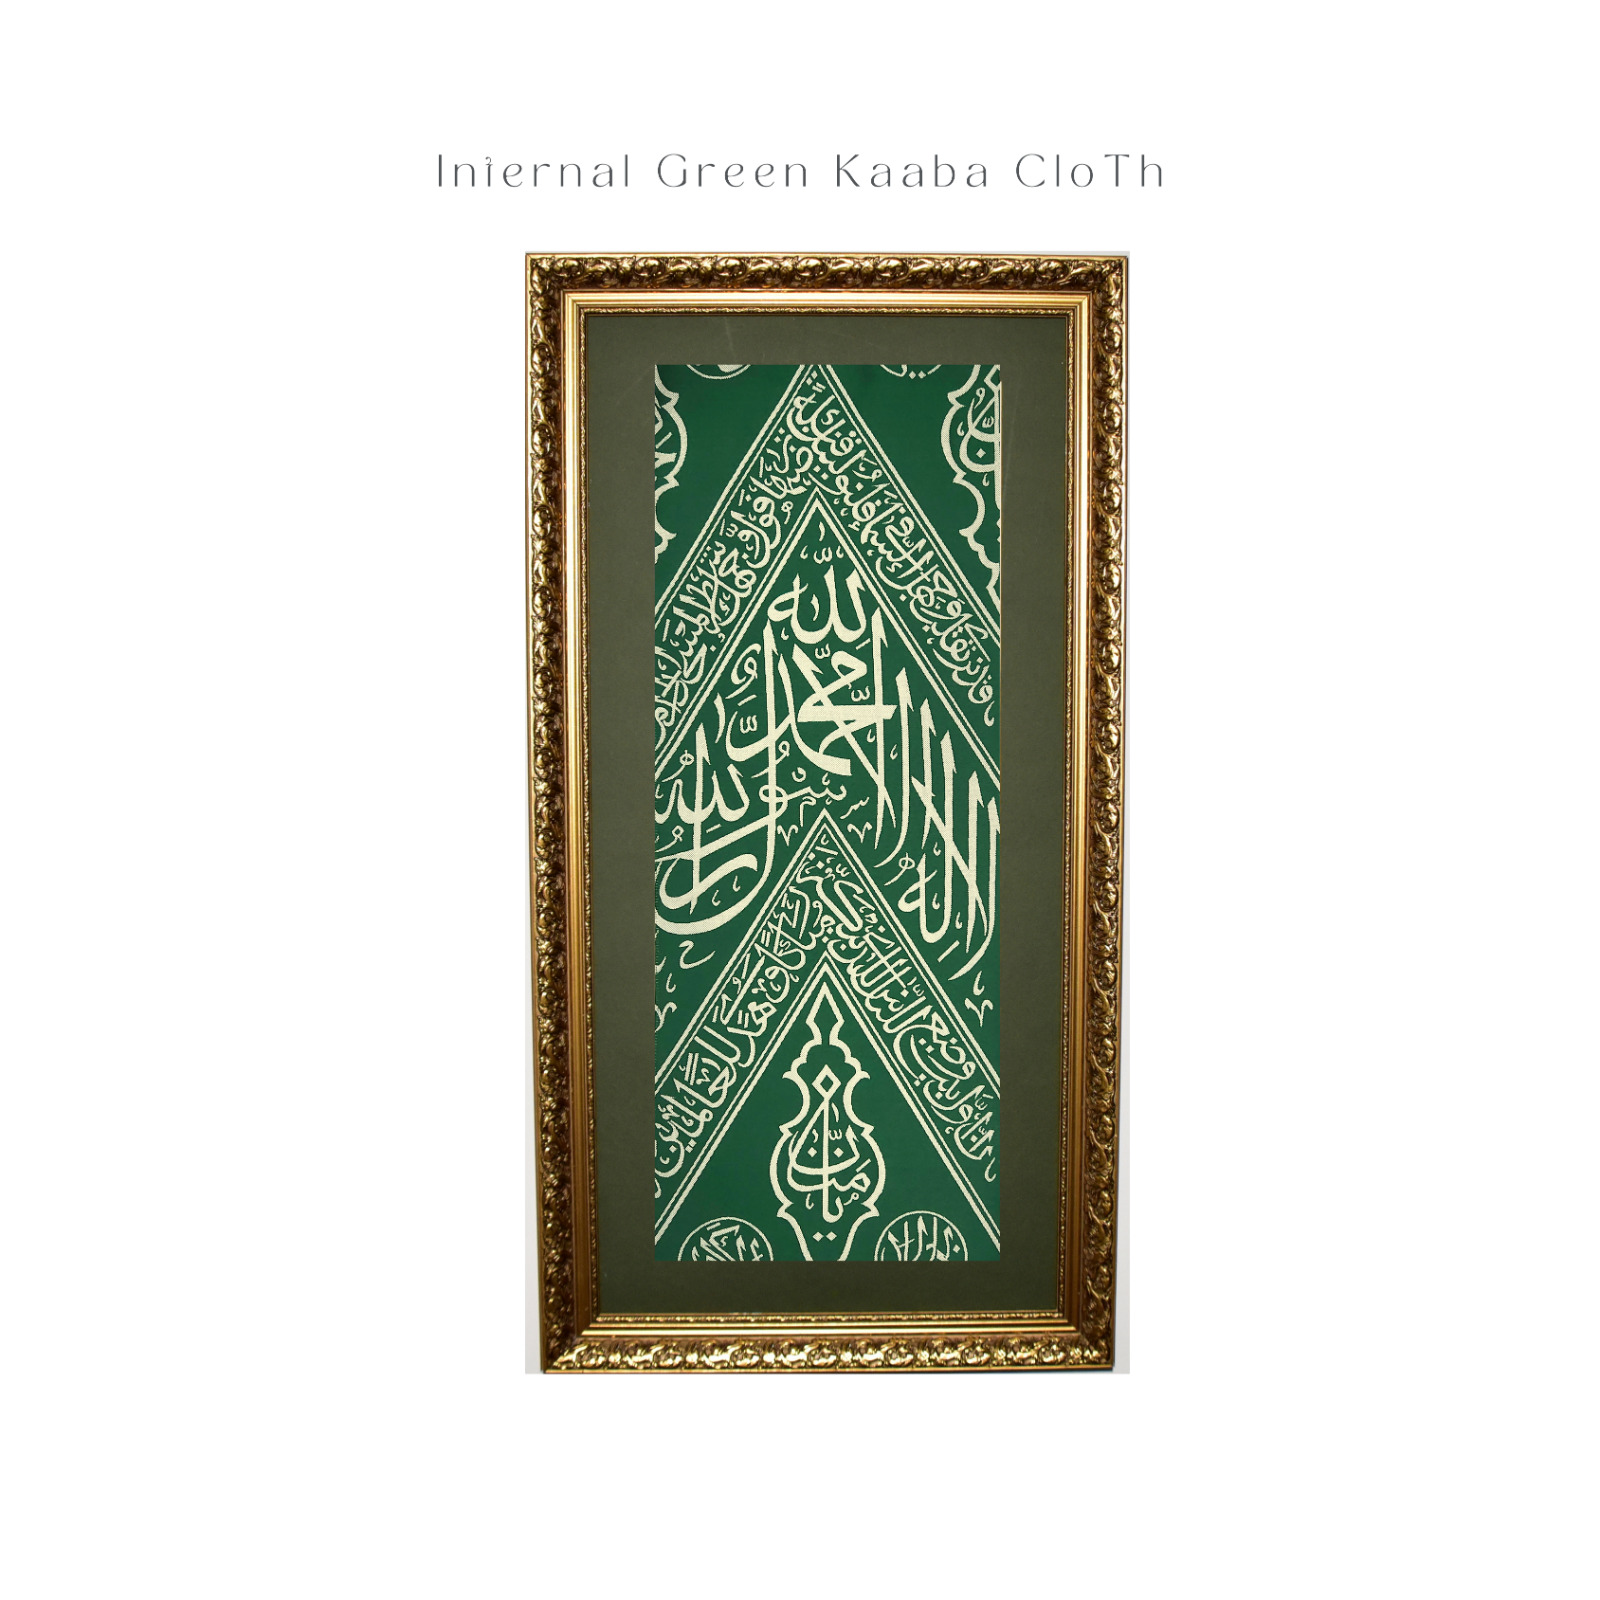 Certified Authentic Holy Kaaba Kiswa Framed Inside Green Cover 